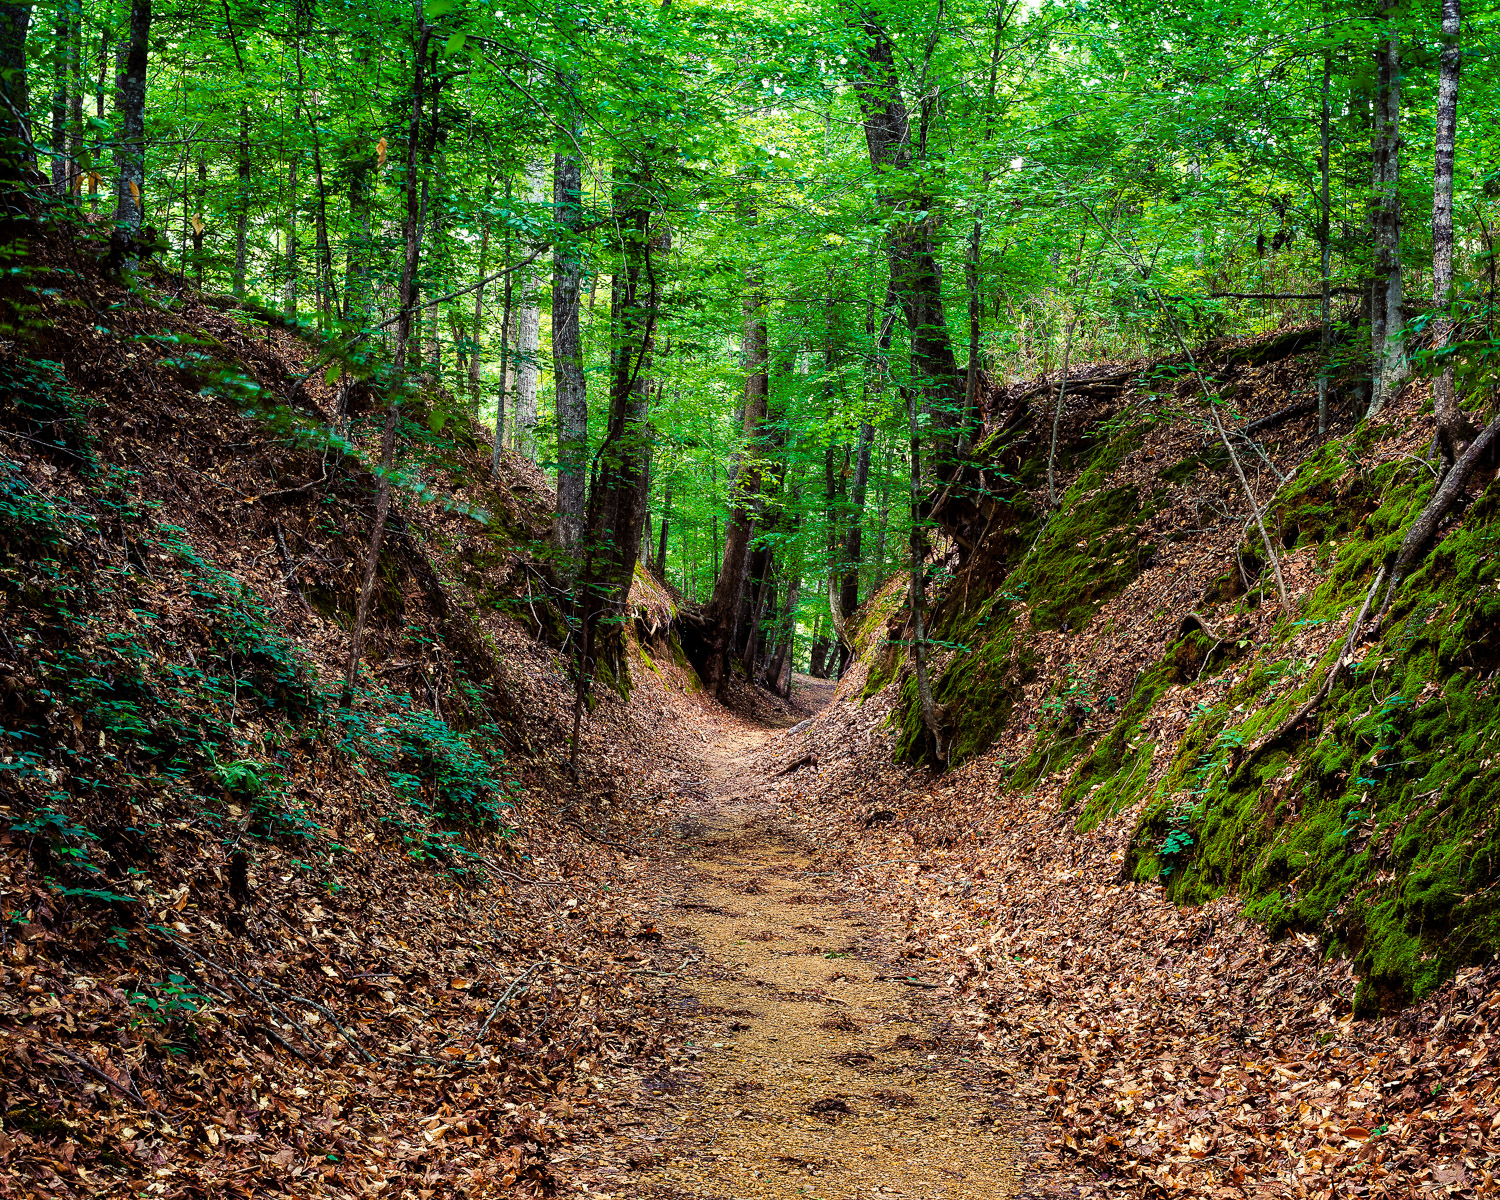 Sunken Trace, deeply eroded by hundreds of years of foot and cart travel. A section of the original Natchez Trace at mile 41.5 of the Natchez Trace Parkway, Mississippi.